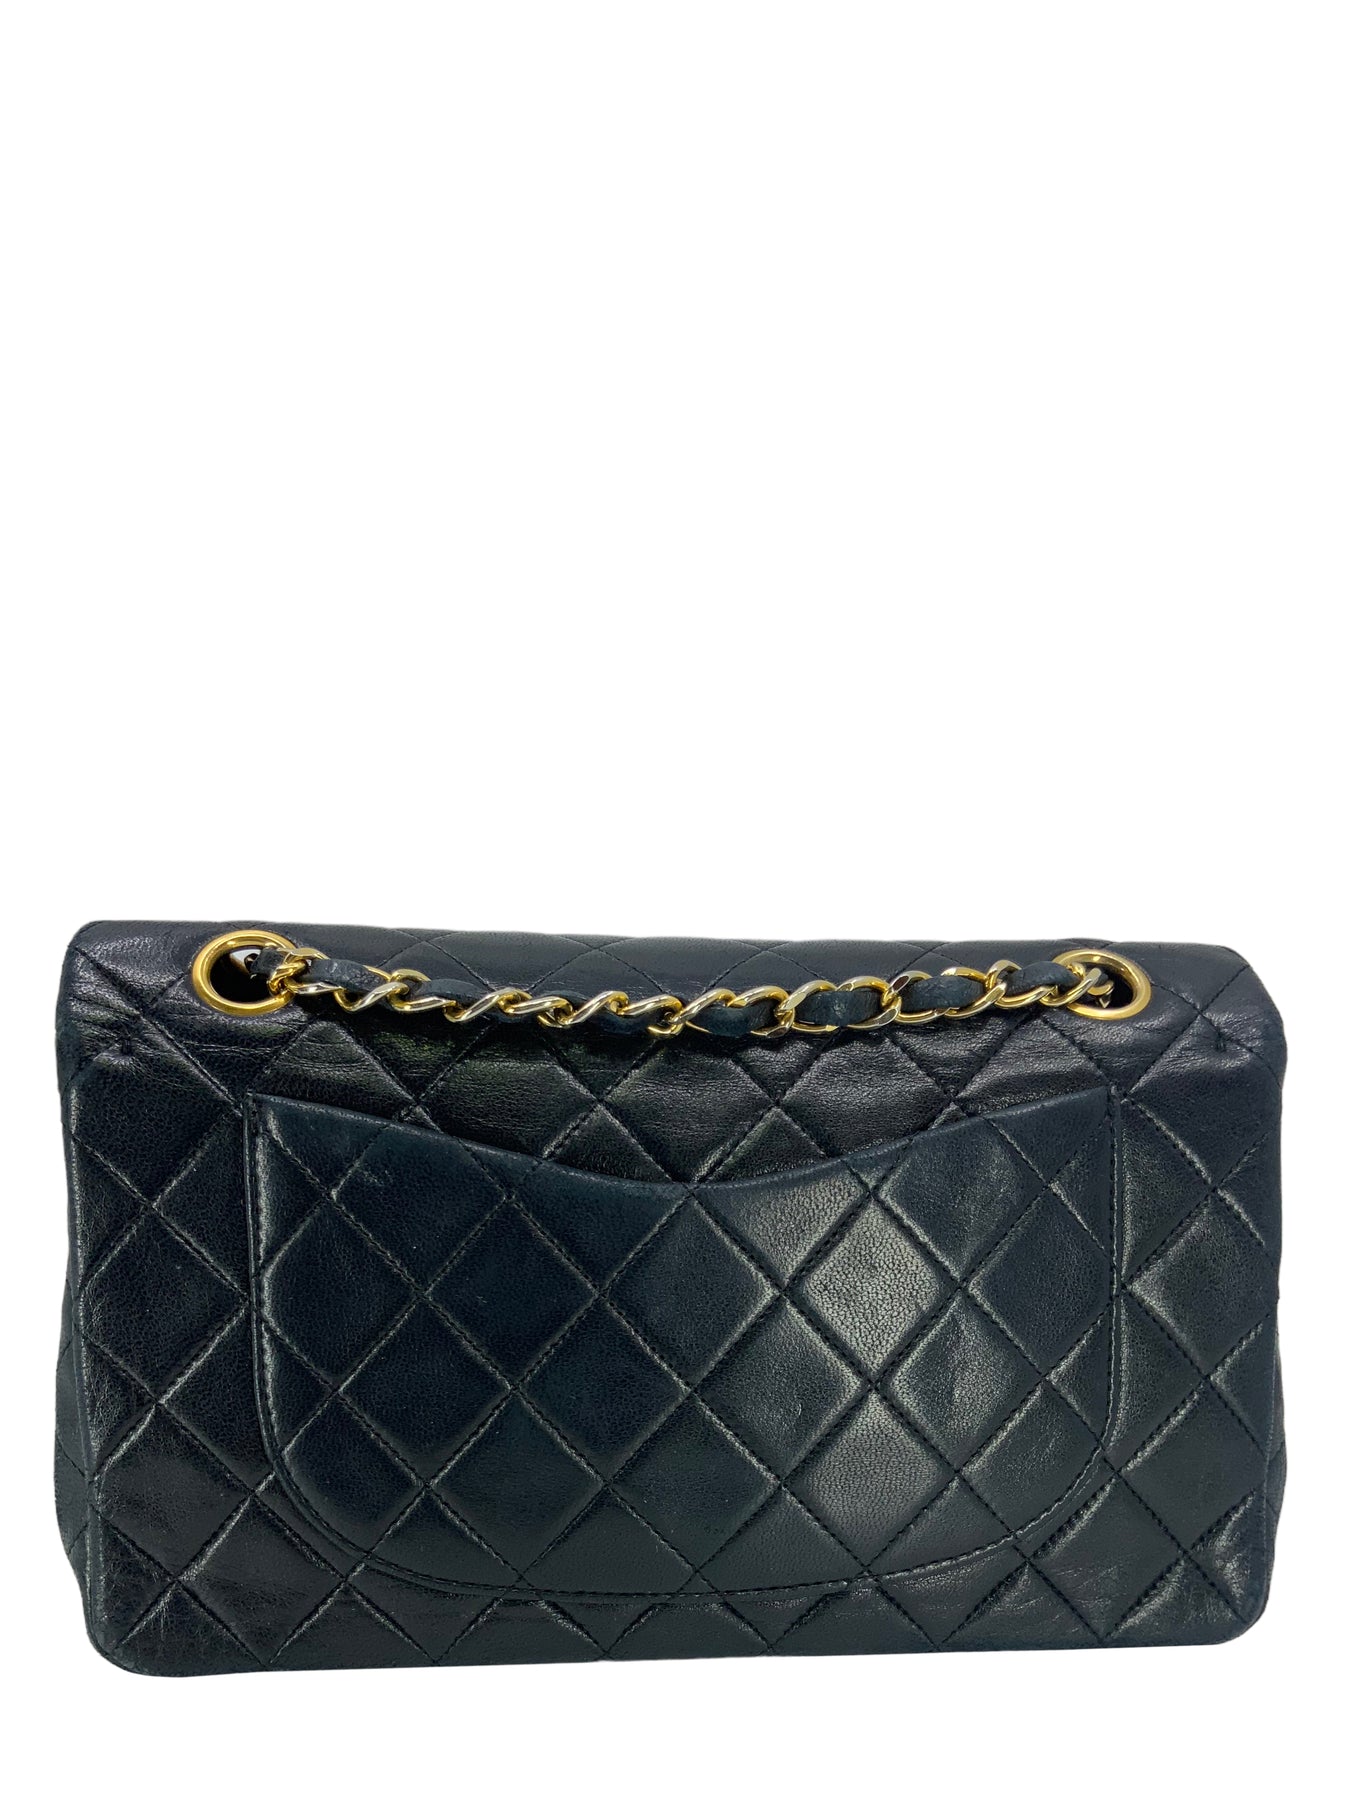 CHANEL Pre-Owned Small Straight Flap Shoulder Bag - Farfetch